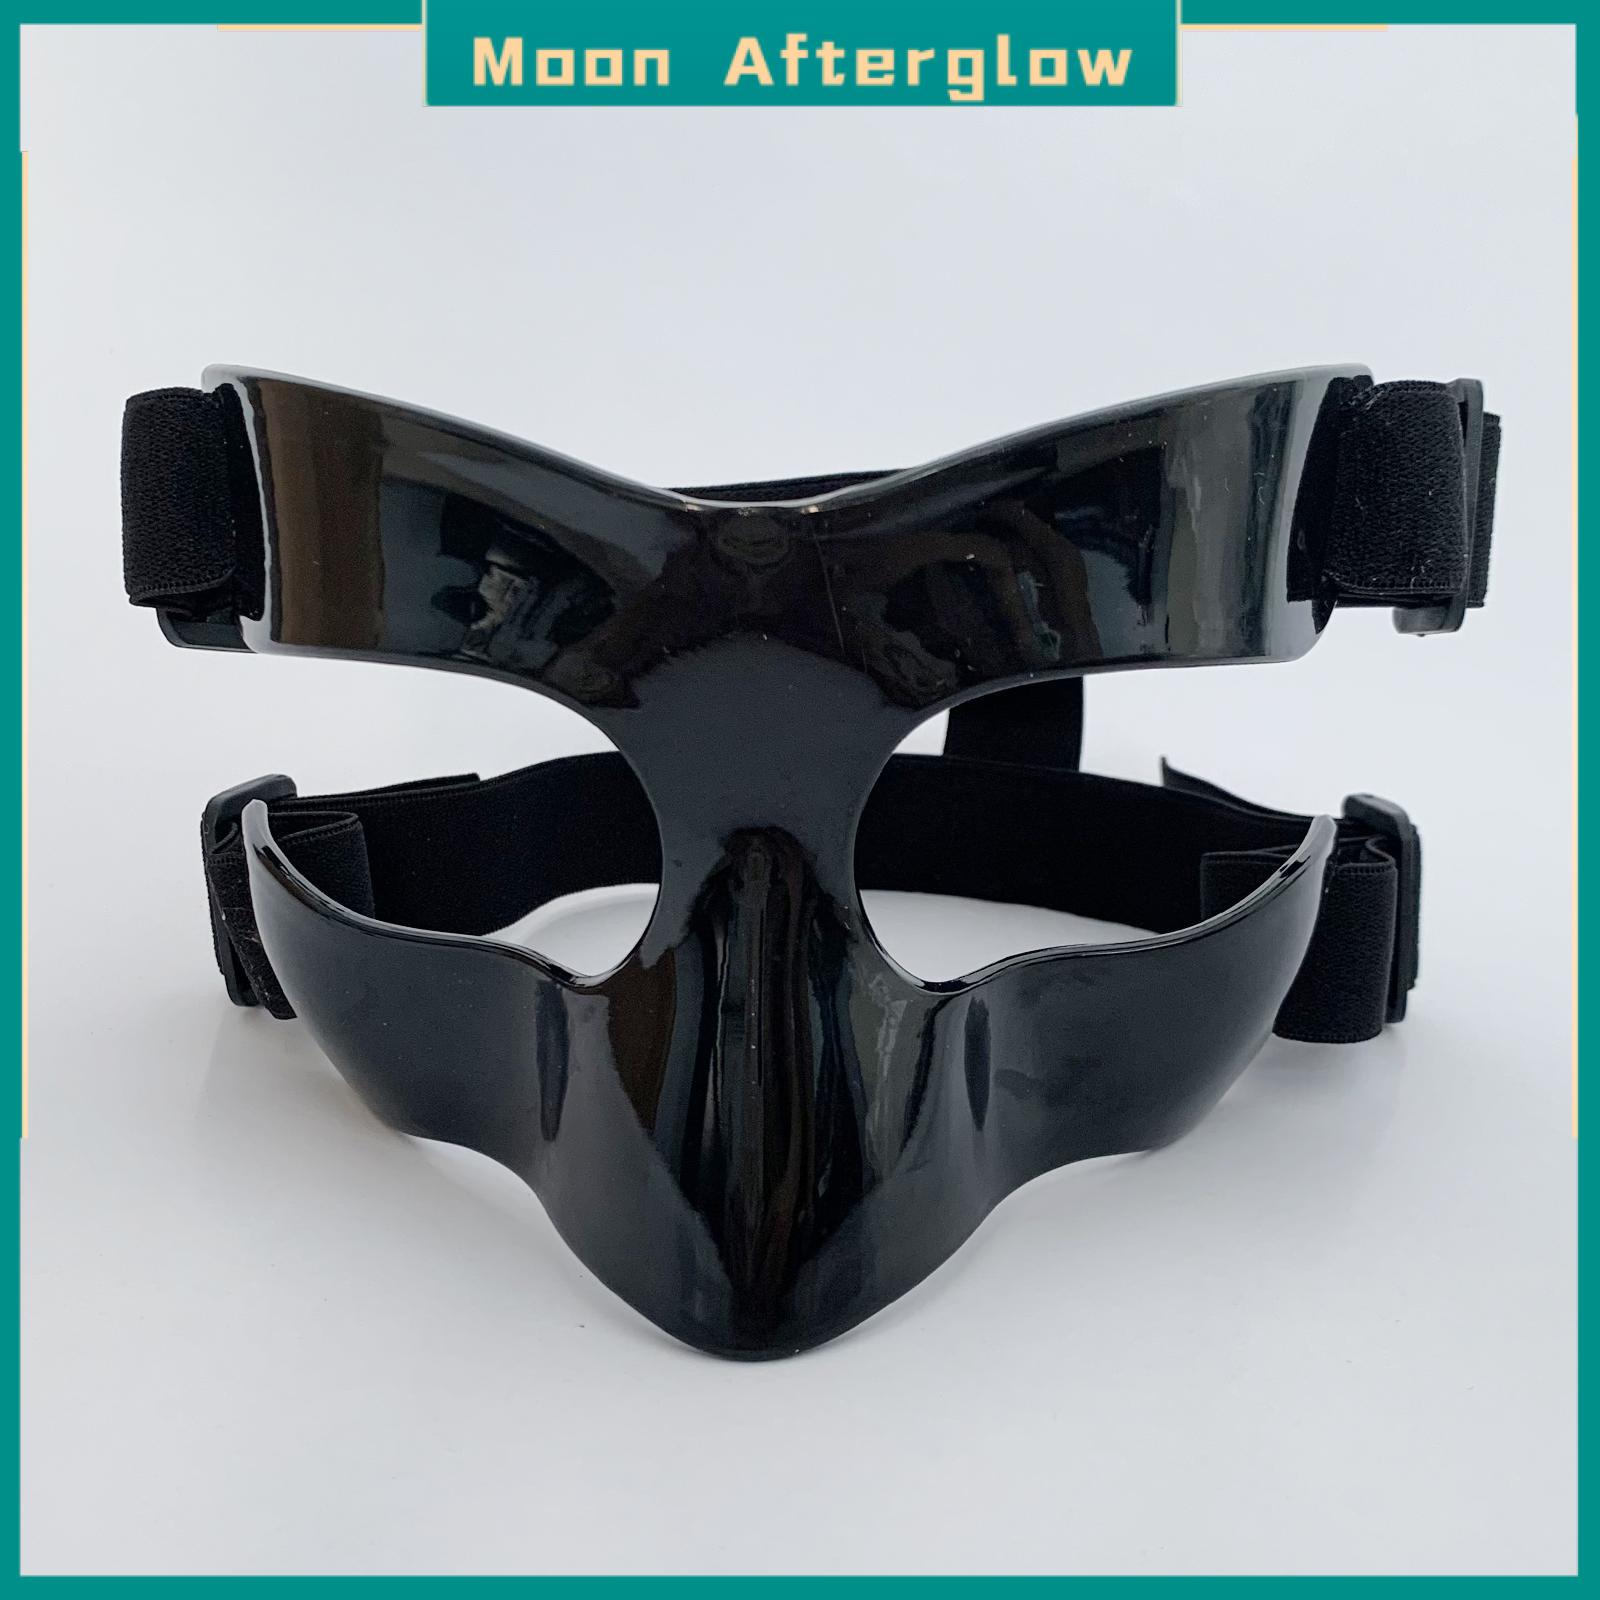 Moon Afterglow Basketball Mask Adjustable Face Mask for Athletic Workout